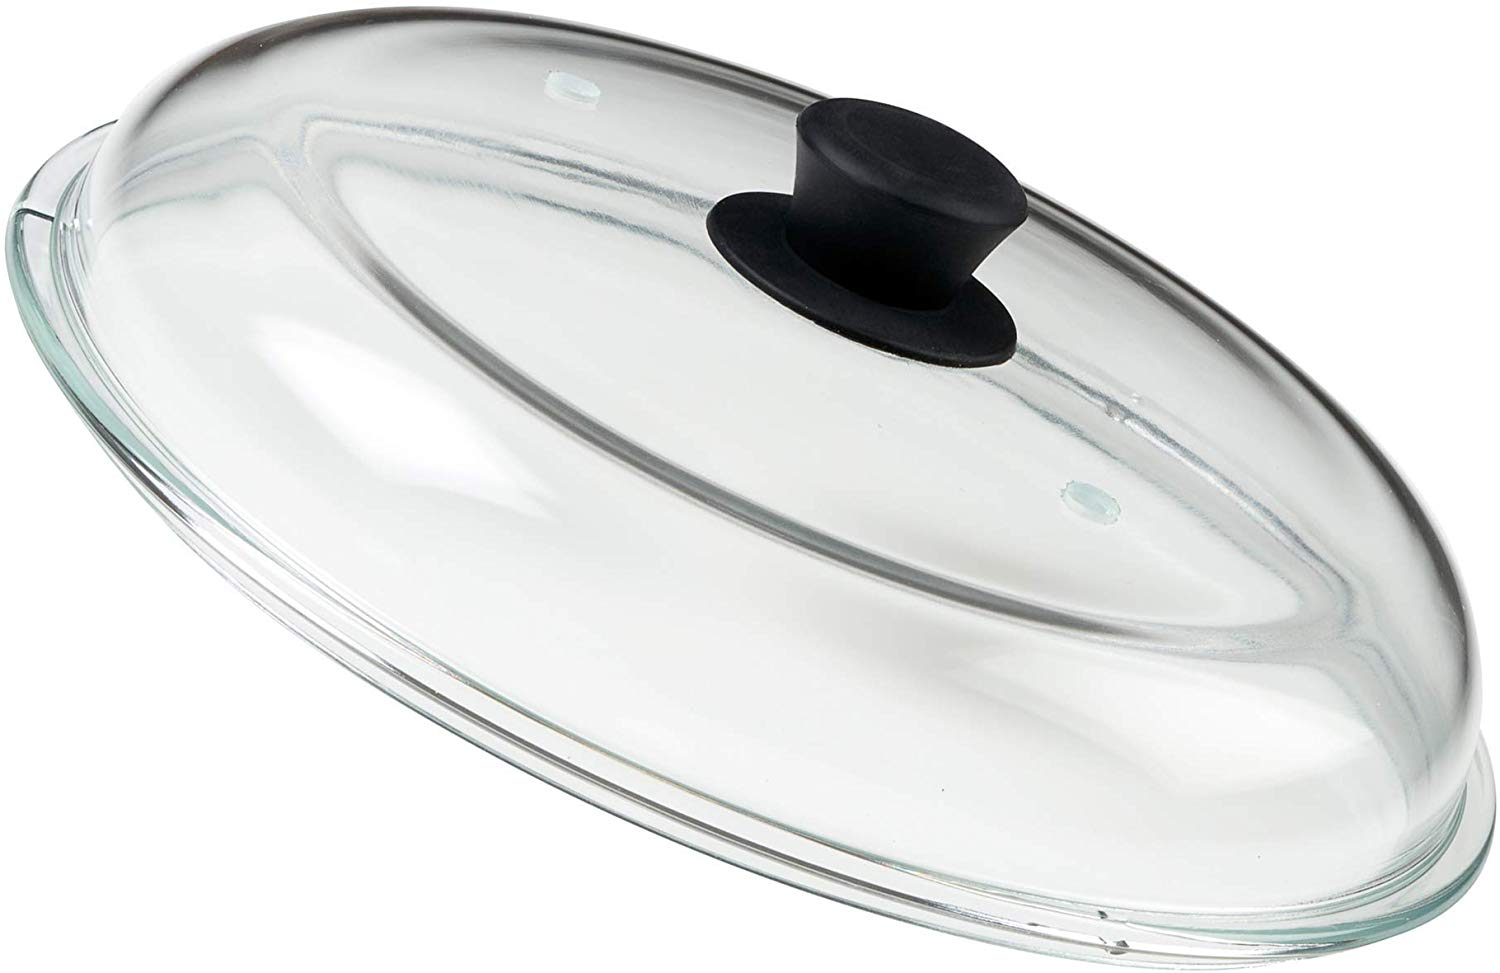 LSR Loreso Microwave Splatter Dish Cover - Heat Resistance Clear Glass, Vented Silicone Guard with Grip Handle, Collapsible, Blocks Popping Grease